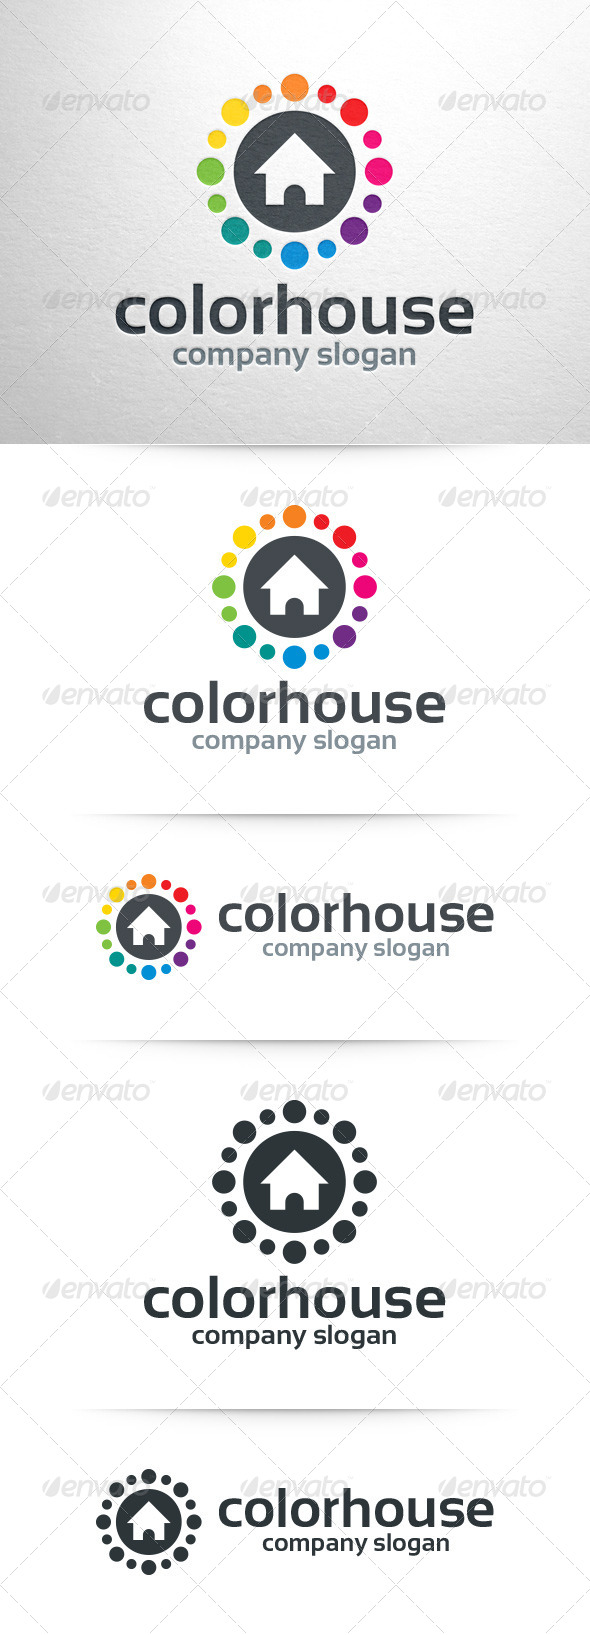 Color House Logo Template